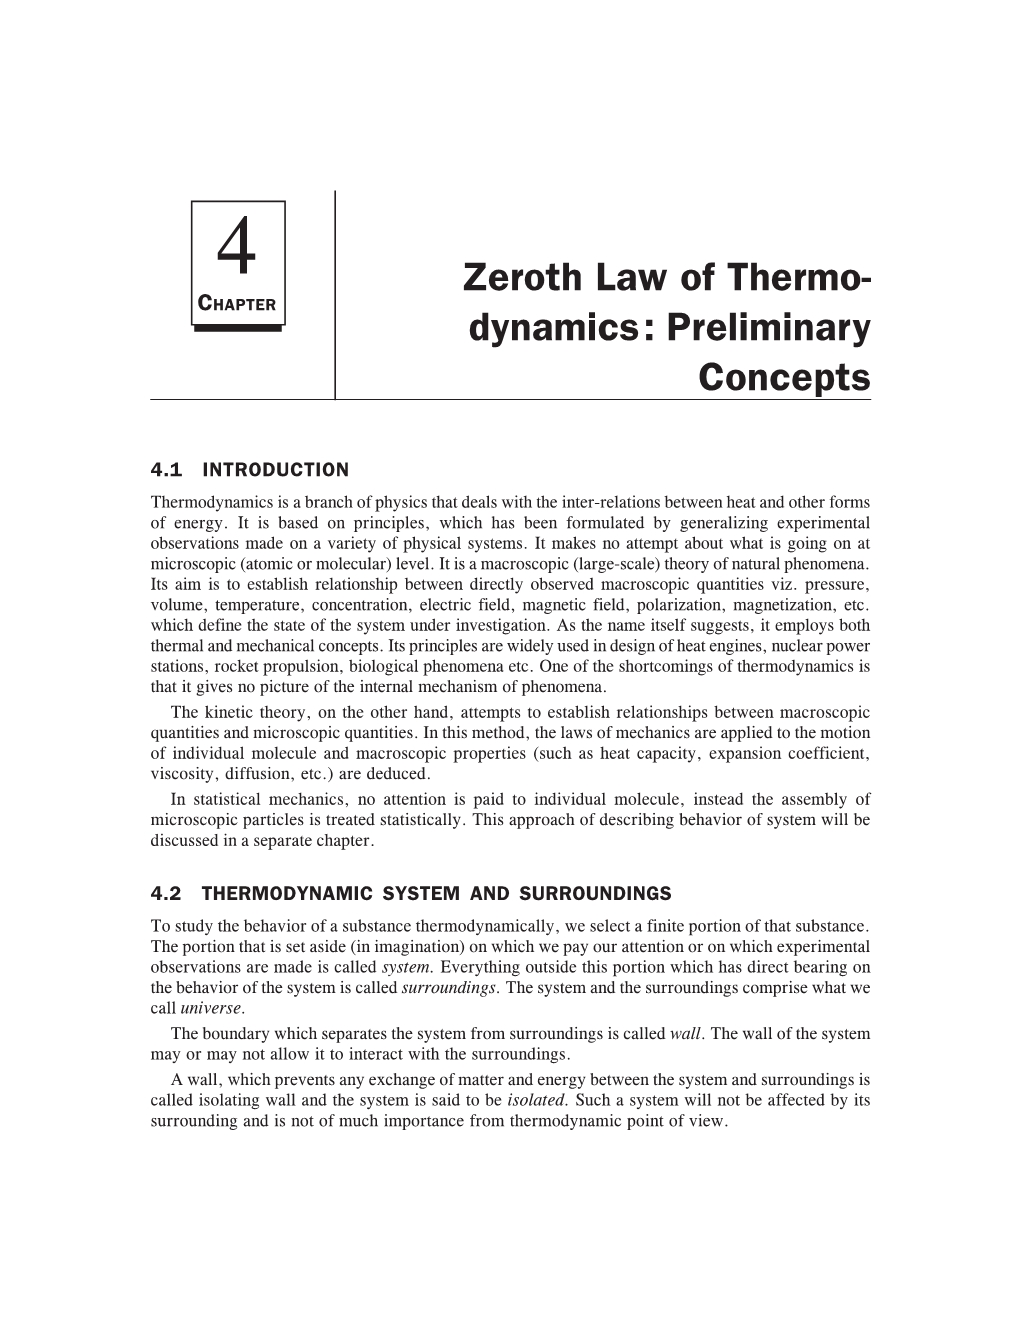 Zeroth Law of Thermo- Dynamics: Preliminary Concepts